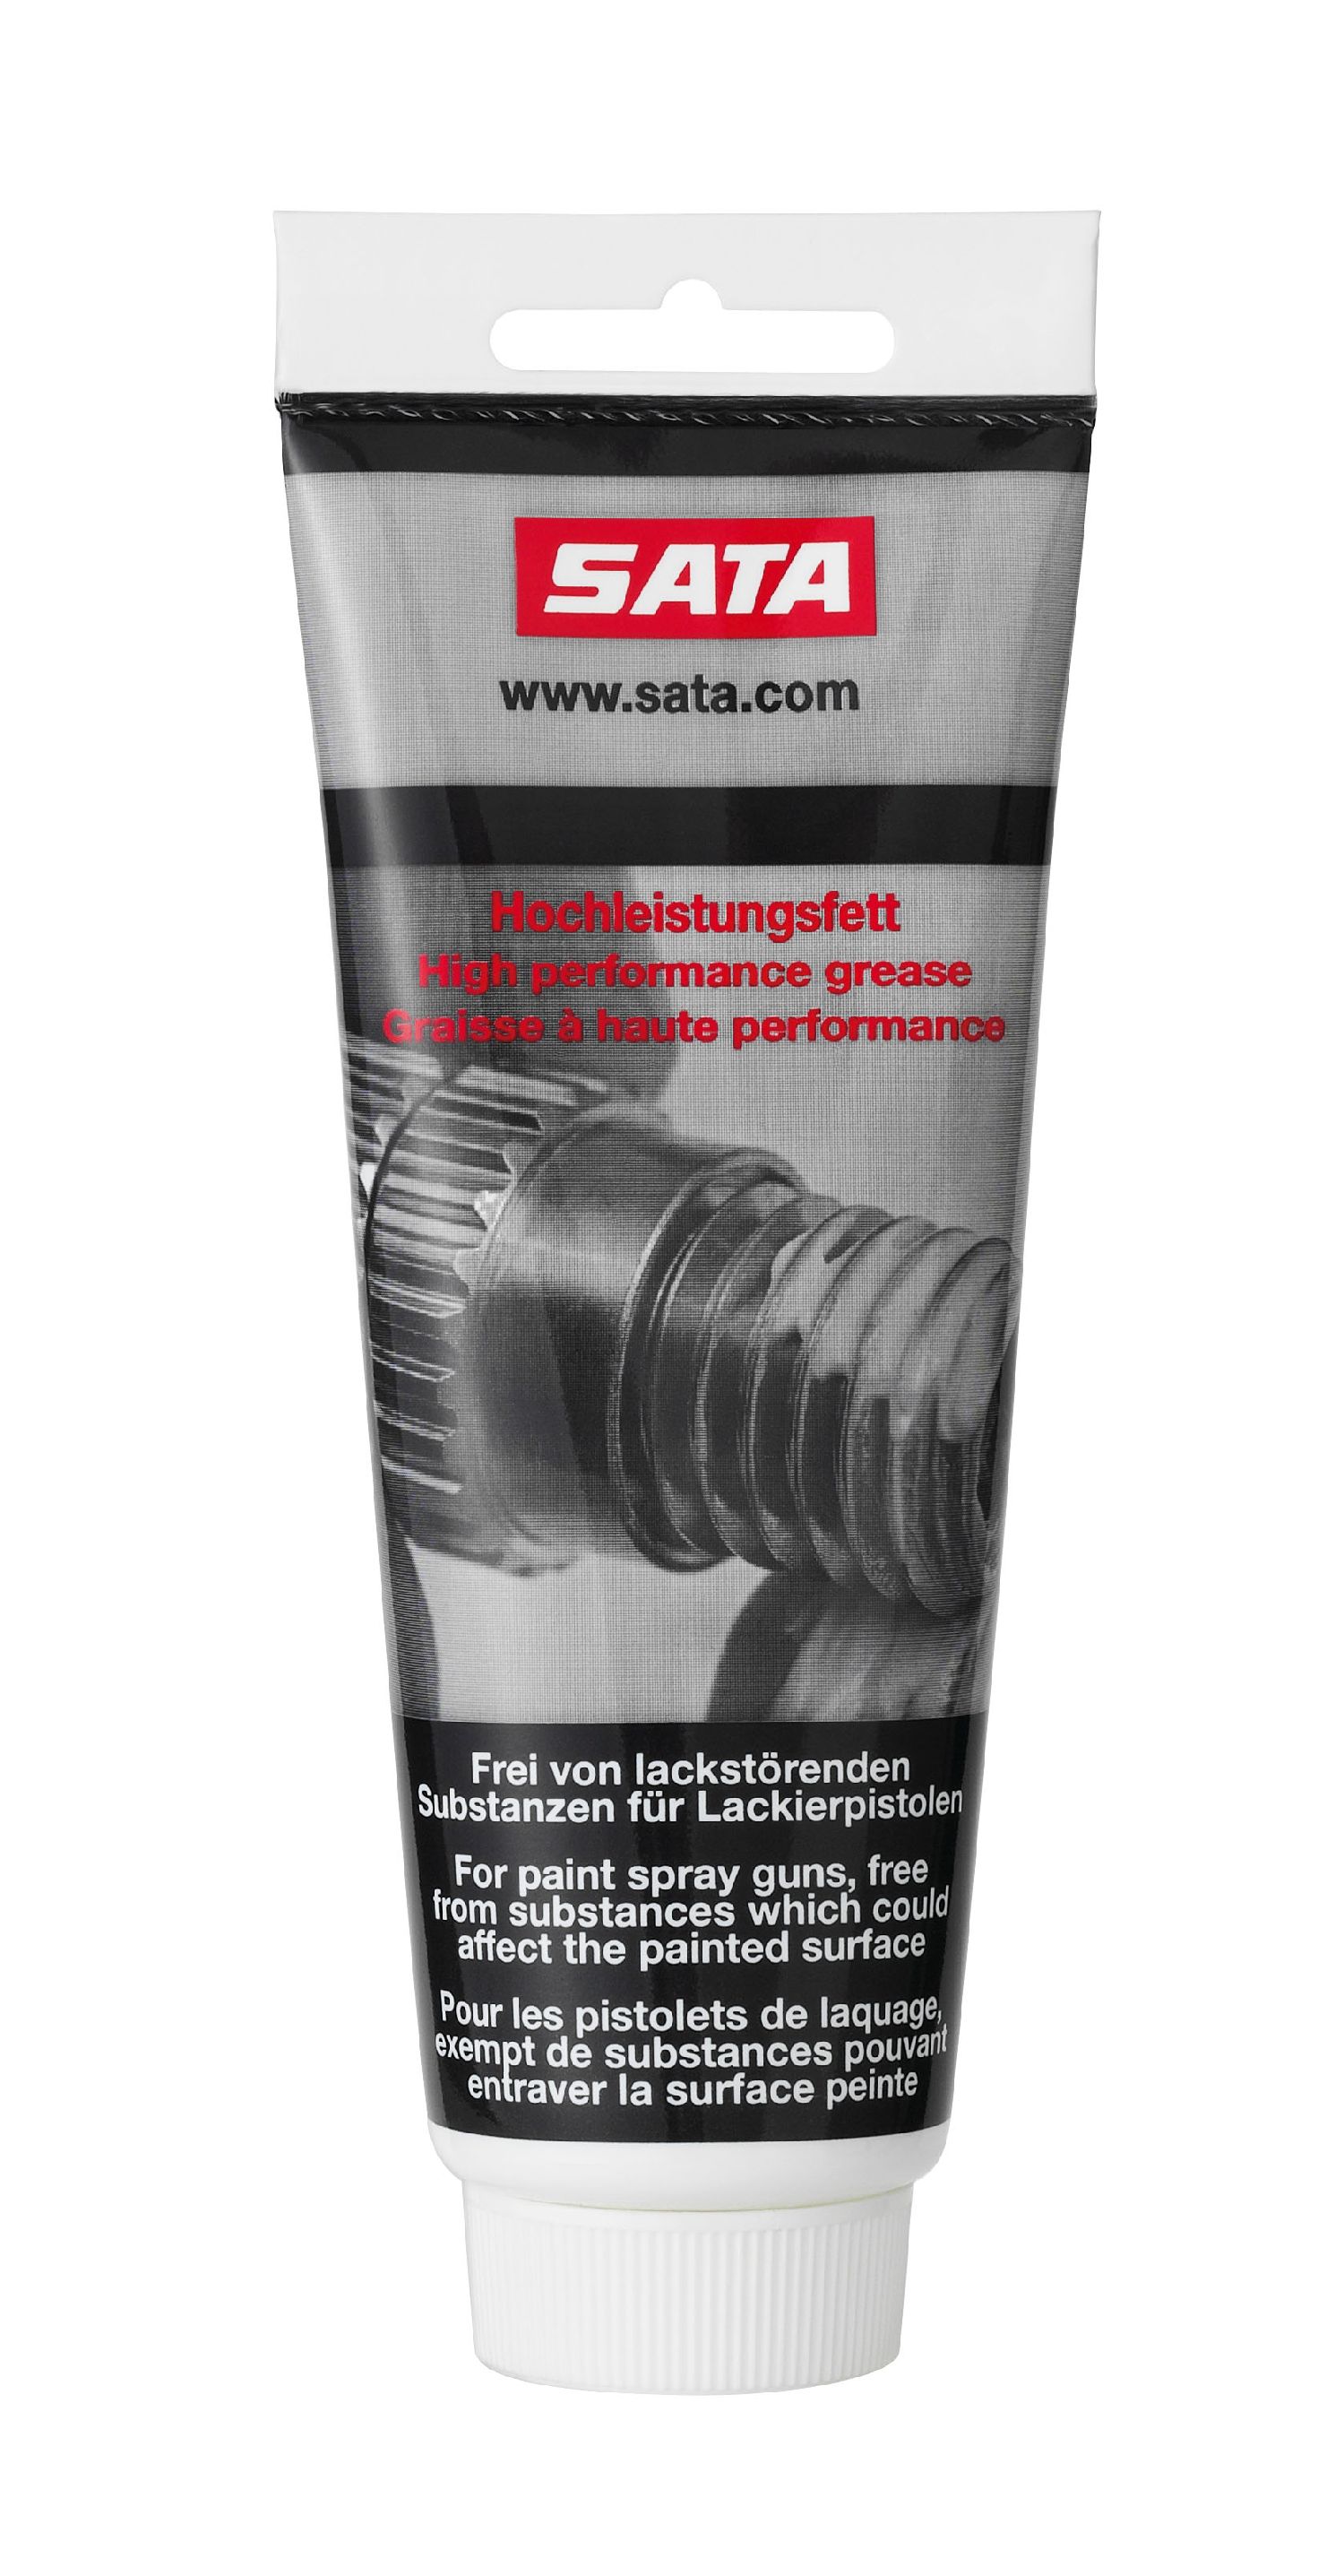 SATA high performance grease, silicone- and acid-free